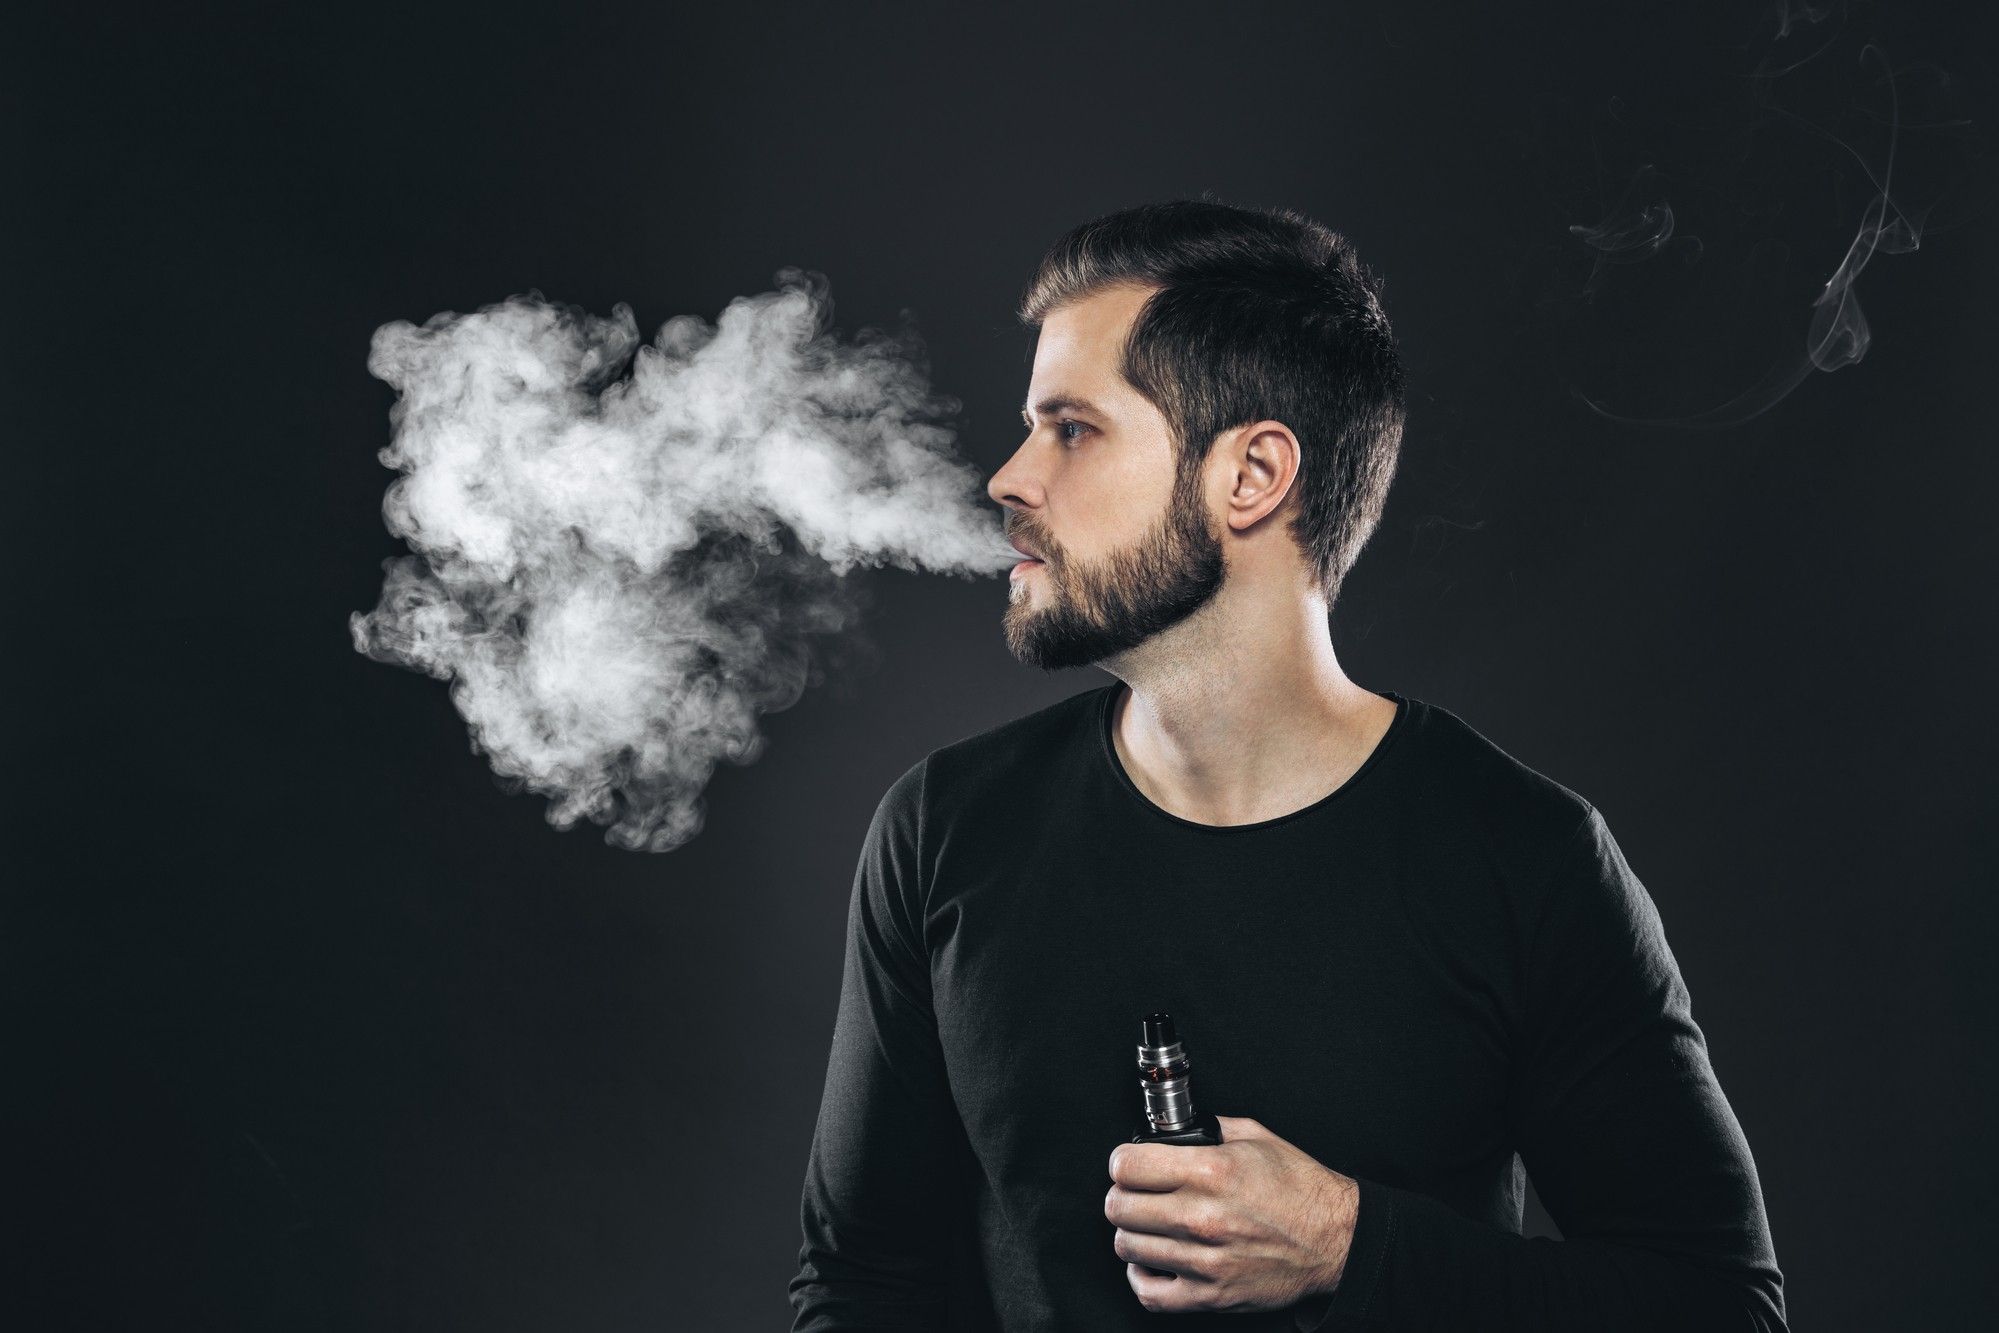 Flavored THC vape oil may be harmful.